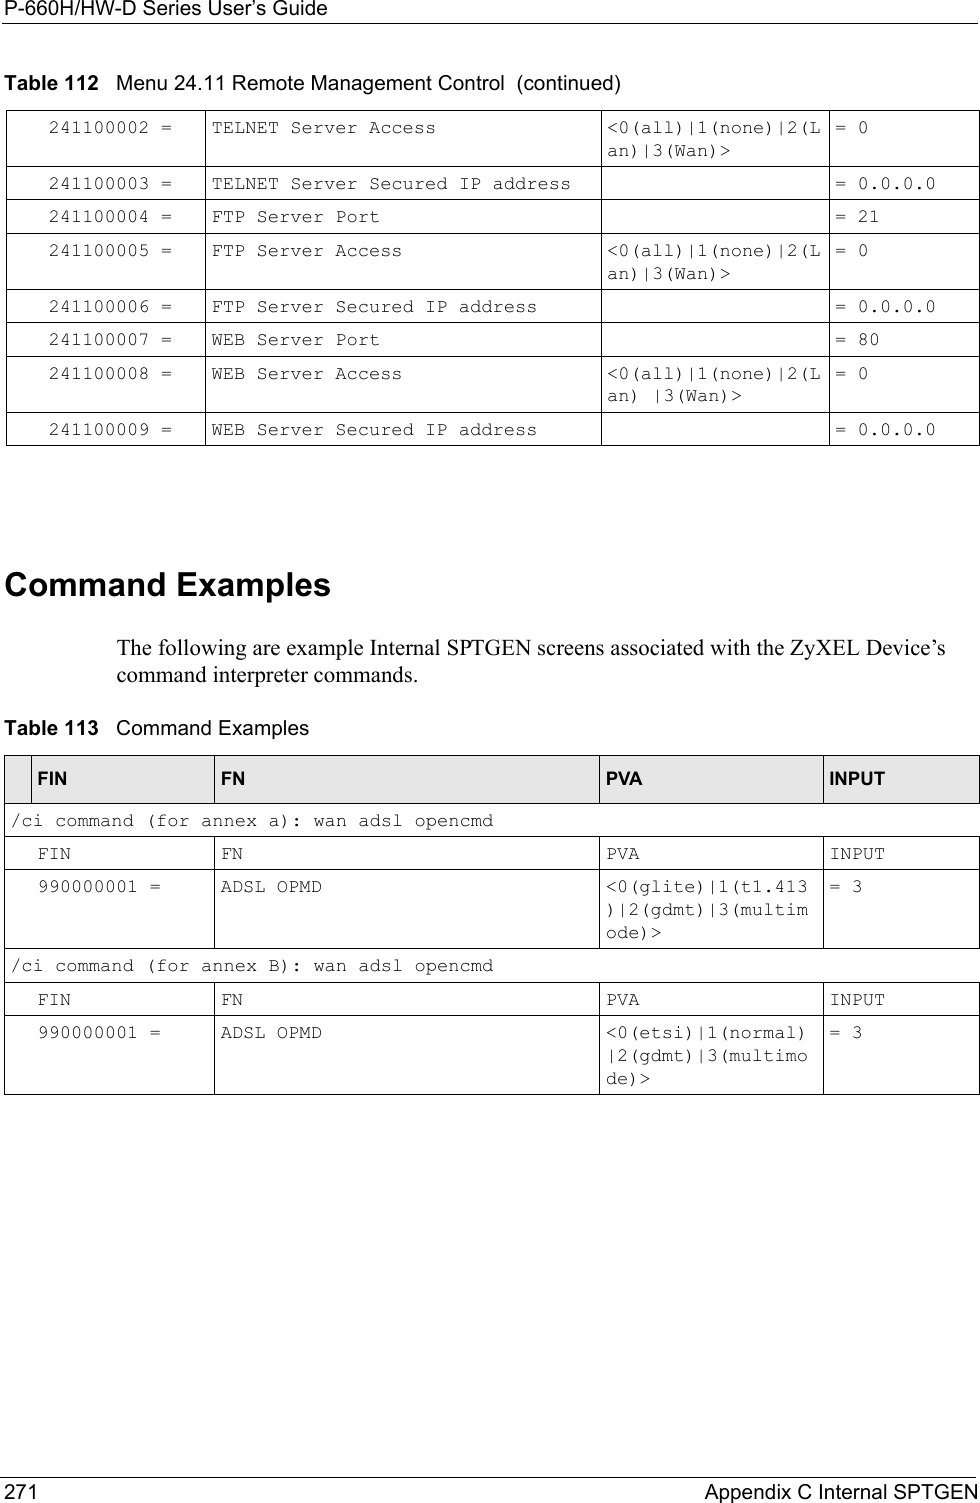 P-660H/HW-D Series User’s Guide271 Appendix C Internal SPTGENCommand ExamplesThe following are example Internal SPTGEN screens associated with the ZyXEL Device’s command interpreter commands.241100002 = TELNET Server Access  &lt;0(all)|1(none)|2(Lan)|3(Wan)&gt; = 0241100003 = TELNET Server Secured IP address  = 0.0.0.0241100004 = FTP Server Port  = 21241100005 = FTP Server Access  &lt;0(all)|1(none)|2(Lan)|3(Wan)&gt; = 0241100006 = FTP Server Secured IP address  = 0.0.0.0241100007 = WEB Server Port  = 80241100008 = WEB Server Access  &lt;0(all)|1(none)|2(Lan) |3(Wan)&gt; = 0241100009 = WEB Server Secured IP address = 0.0.0.0Table 112   Menu 24.11 Remote Management Control  (continued)Table 113   Command ExamplesFIN FN PVA INPUT/ci command (for annex a): wan adsl opencmd FIN FN PVA INPUT990000001 = ADSL OPMD  &lt;0(glite)|1(t1.413)|2(gdmt)|3(multimode)&gt;= 3/ci command (for annex B): wan adsl opencmdFIN FN PVA INPUT990000001 = ADSL OPMD  &lt;0(etsi)|1(normal)|2(gdmt)|3(multimode)&gt;= 3